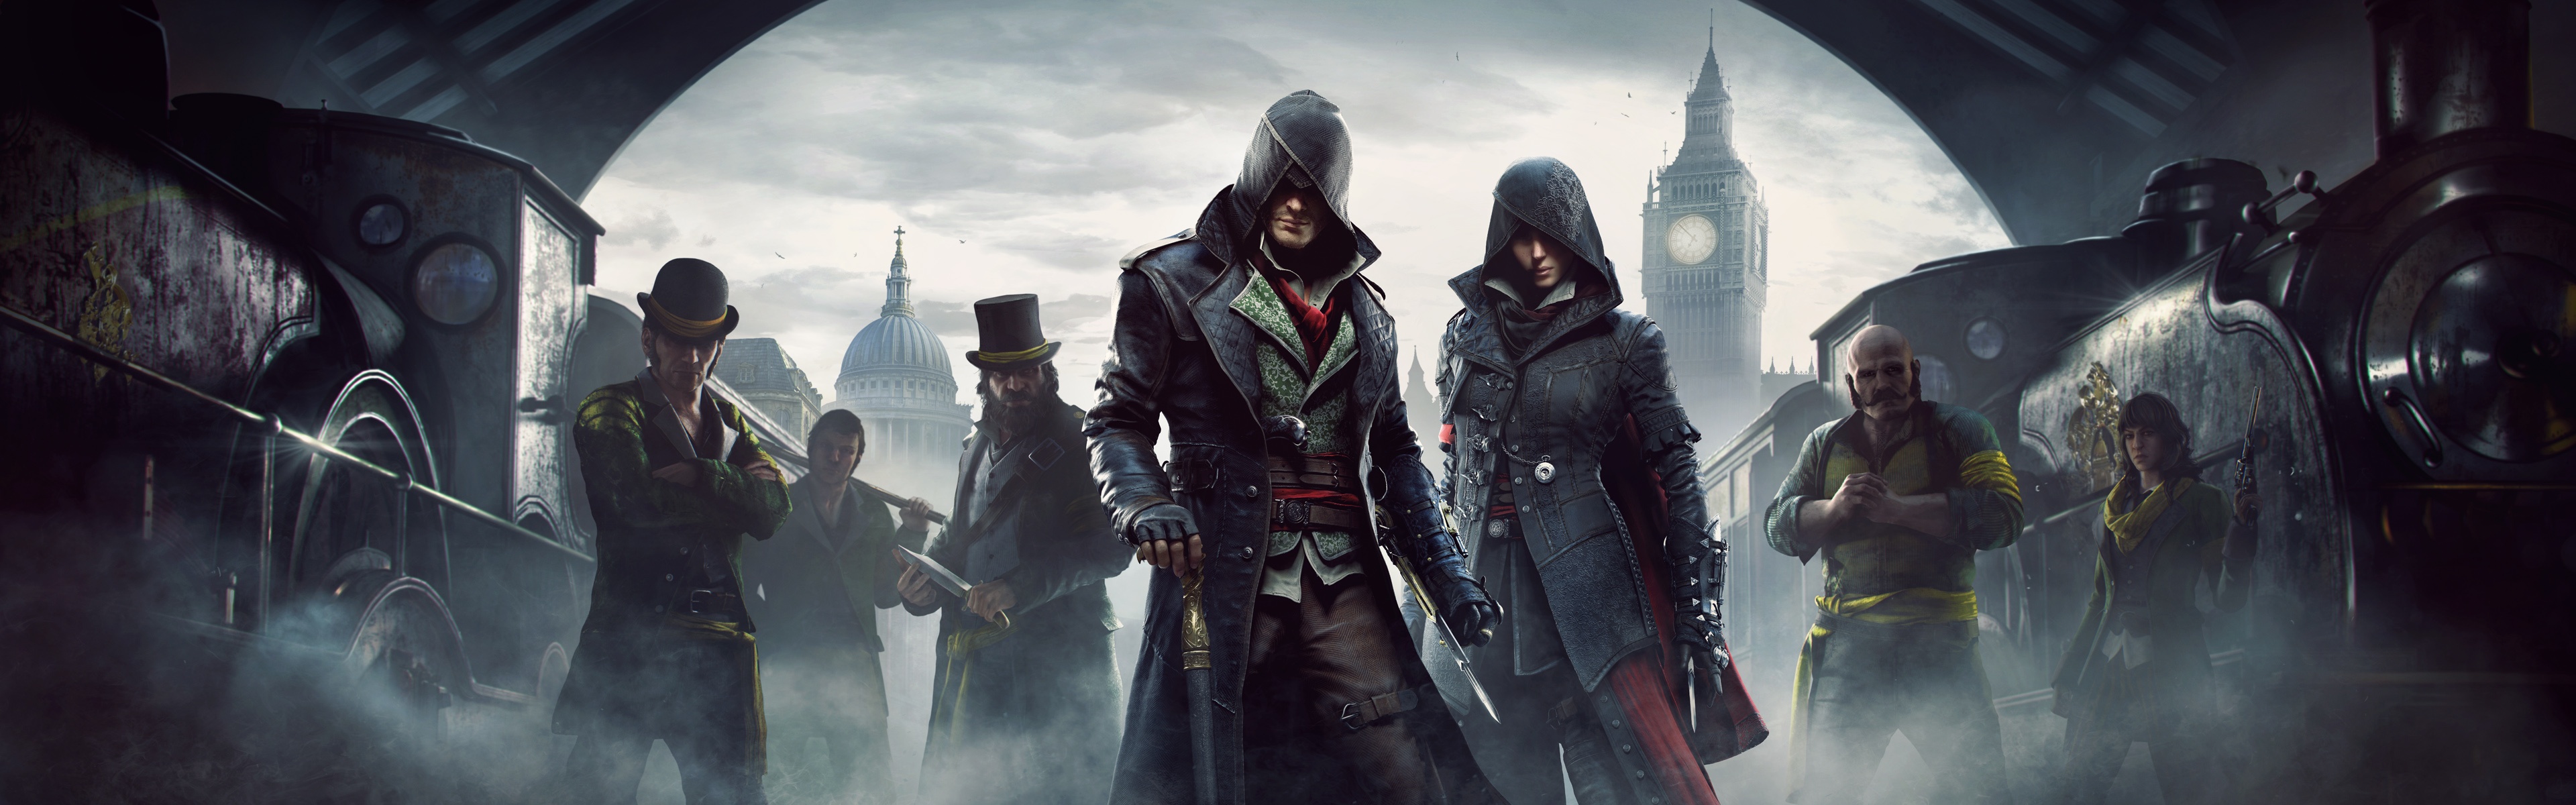 assassins creed syndicate 2015 3840 x 1200 06